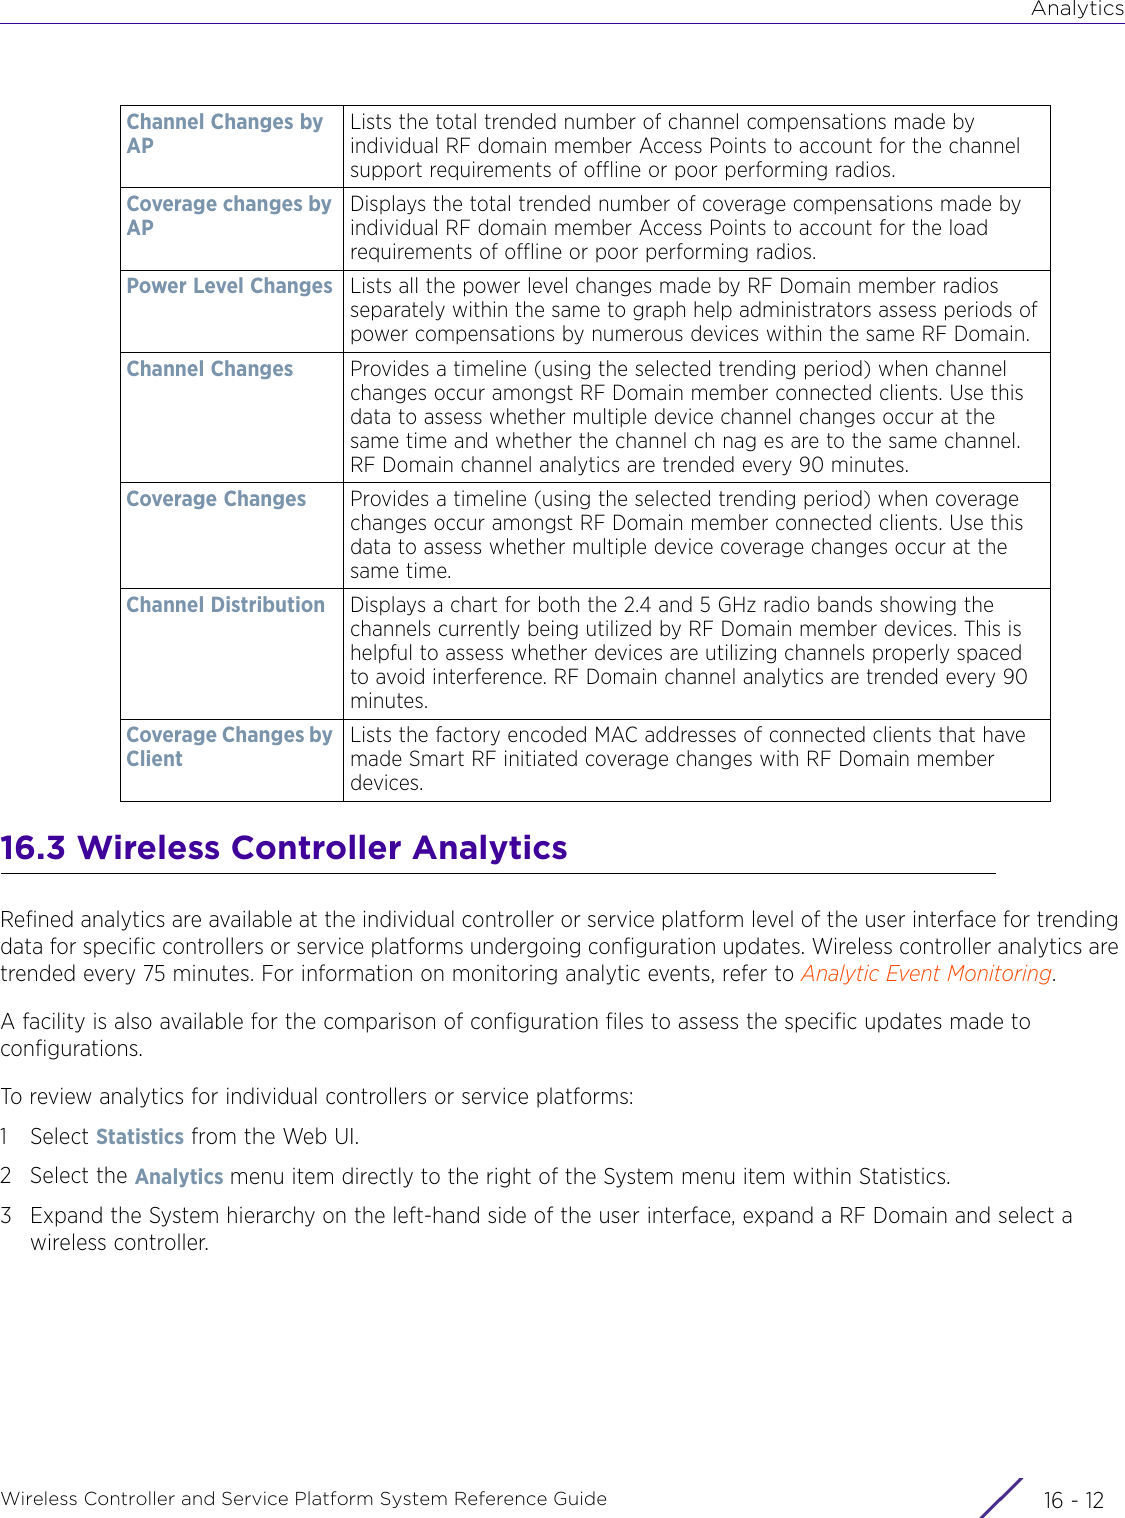 AnalyticsWireless Controller and Service Platform System Reference Guide  16 - 1216.3 Wireless Controller AnalyticsRefined analytics are available at the individual controller or service platform level of the user interface for trending data for specific controllers or service platforms undergoing configuration updates. Wireless controller analytics are trended every 75 minutes. For information on monitoring analytic events, refer to Analytic Event Monitoring.A facility is also available for the comparison of configuration files to assess the specific updates made to configurations.To review analytics for individual controllers or service platforms:1Select Statistics from the Web UI.2 Select the Analytics menu item directly to the right of the System menu item within Statistics.3 Expand the System hierarchy on the left-hand side of the user interface, expand a RF Domain and select a wireless controller.Channel Changes by APLists the total trended number of channel compensations made by individual RF domain member Access Points to account for the channel support requirements of offline or poor performing radios.Coverage changes by APDisplays the total trended number of coverage compensations made by individual RF domain member Access Points to account for the load requirements of offline or poor performing radios. Power Level Changes Lists all the power level changes made by RF Domain member radios separately within the same to graph help administrators assess periods of power compensations by numerous devices within the same RF Domain.Channel Changes Provides a timeline (using the selected trending period) when channel changes occur amongst RF Domain member connected clients. Use this data to assess whether multiple device channel changes occur at the same time and whether the channel ch nag es are to the same channel. RF Domain channel analytics are trended every 90 minutes.Coverage Changes Provides a timeline (using the selected trending period) when coverage changes occur amongst RF Domain member connected clients. Use this data to assess whether multiple device coverage changes occur at the same time.Channel Distribution Displays a chart for both the 2.4 and 5 GHz radio bands showing the channels currently being utilized by RF Domain member devices. This is helpful to assess whether devices are utilizing channels properly spaced to avoid interference. RF Domain channel analytics are trended every 90 minutes.Coverage Changes by ClientLists the factory encoded MAC addresses of connected clients that have made Smart RF initiated coverage changes with RF Domain member devices.